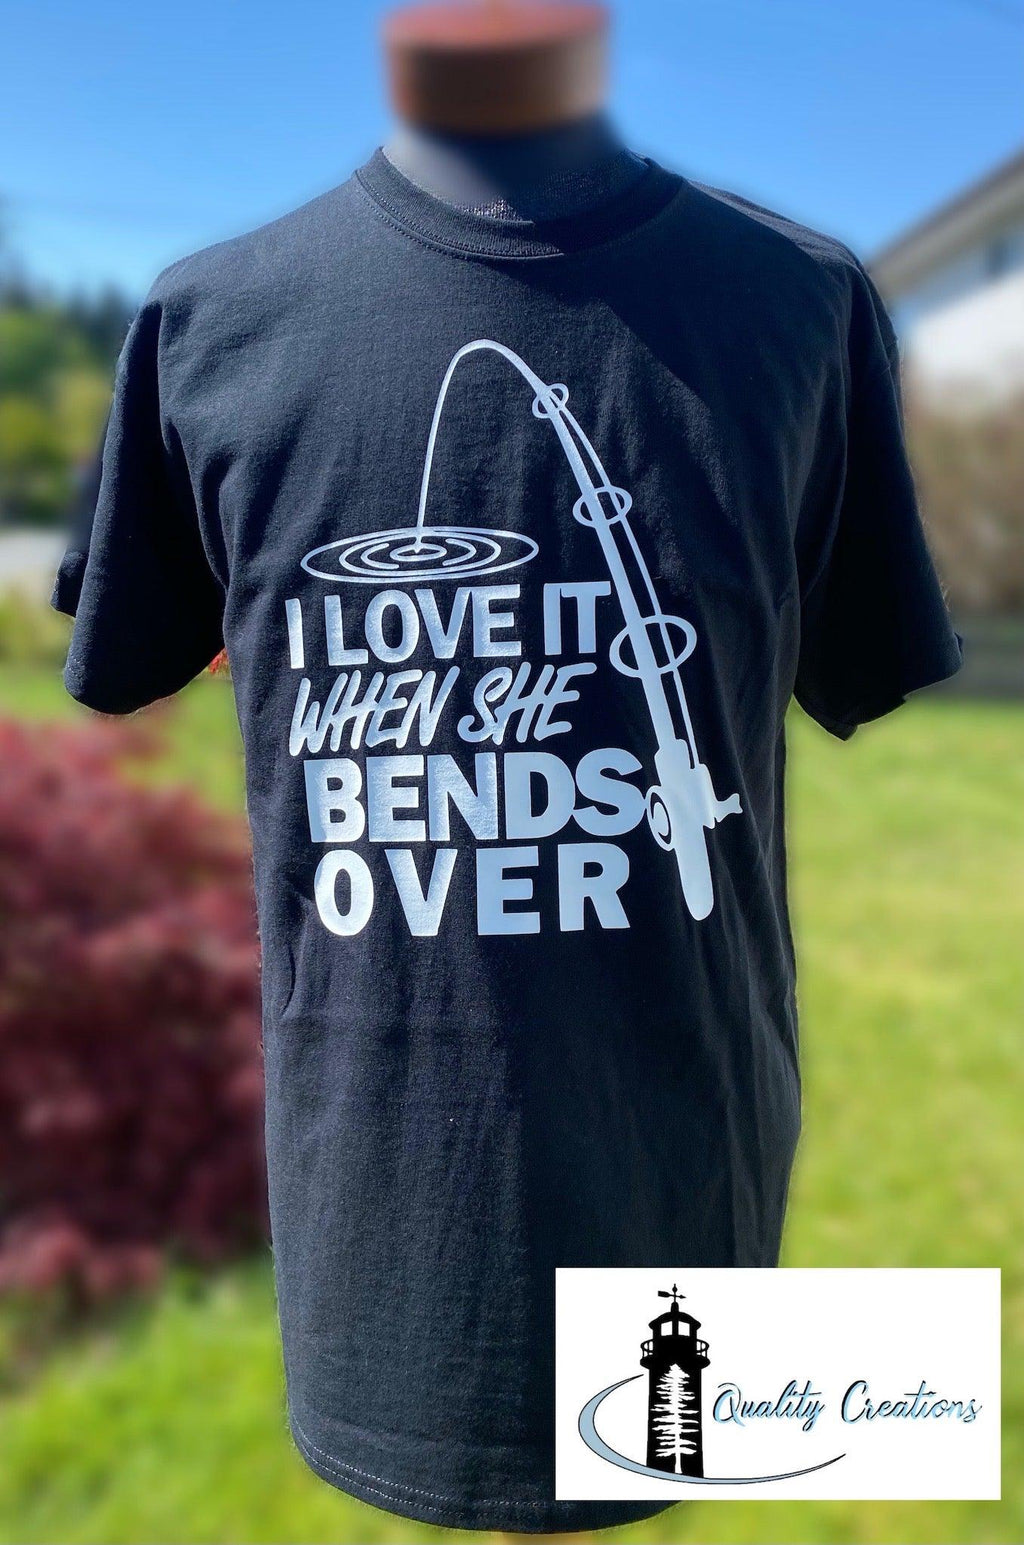 I love it when she bends over funny t-shirt quality creations canada Moncton, Salisbury, British Columbia, pacific, Atlantic, ocean, fishing￼